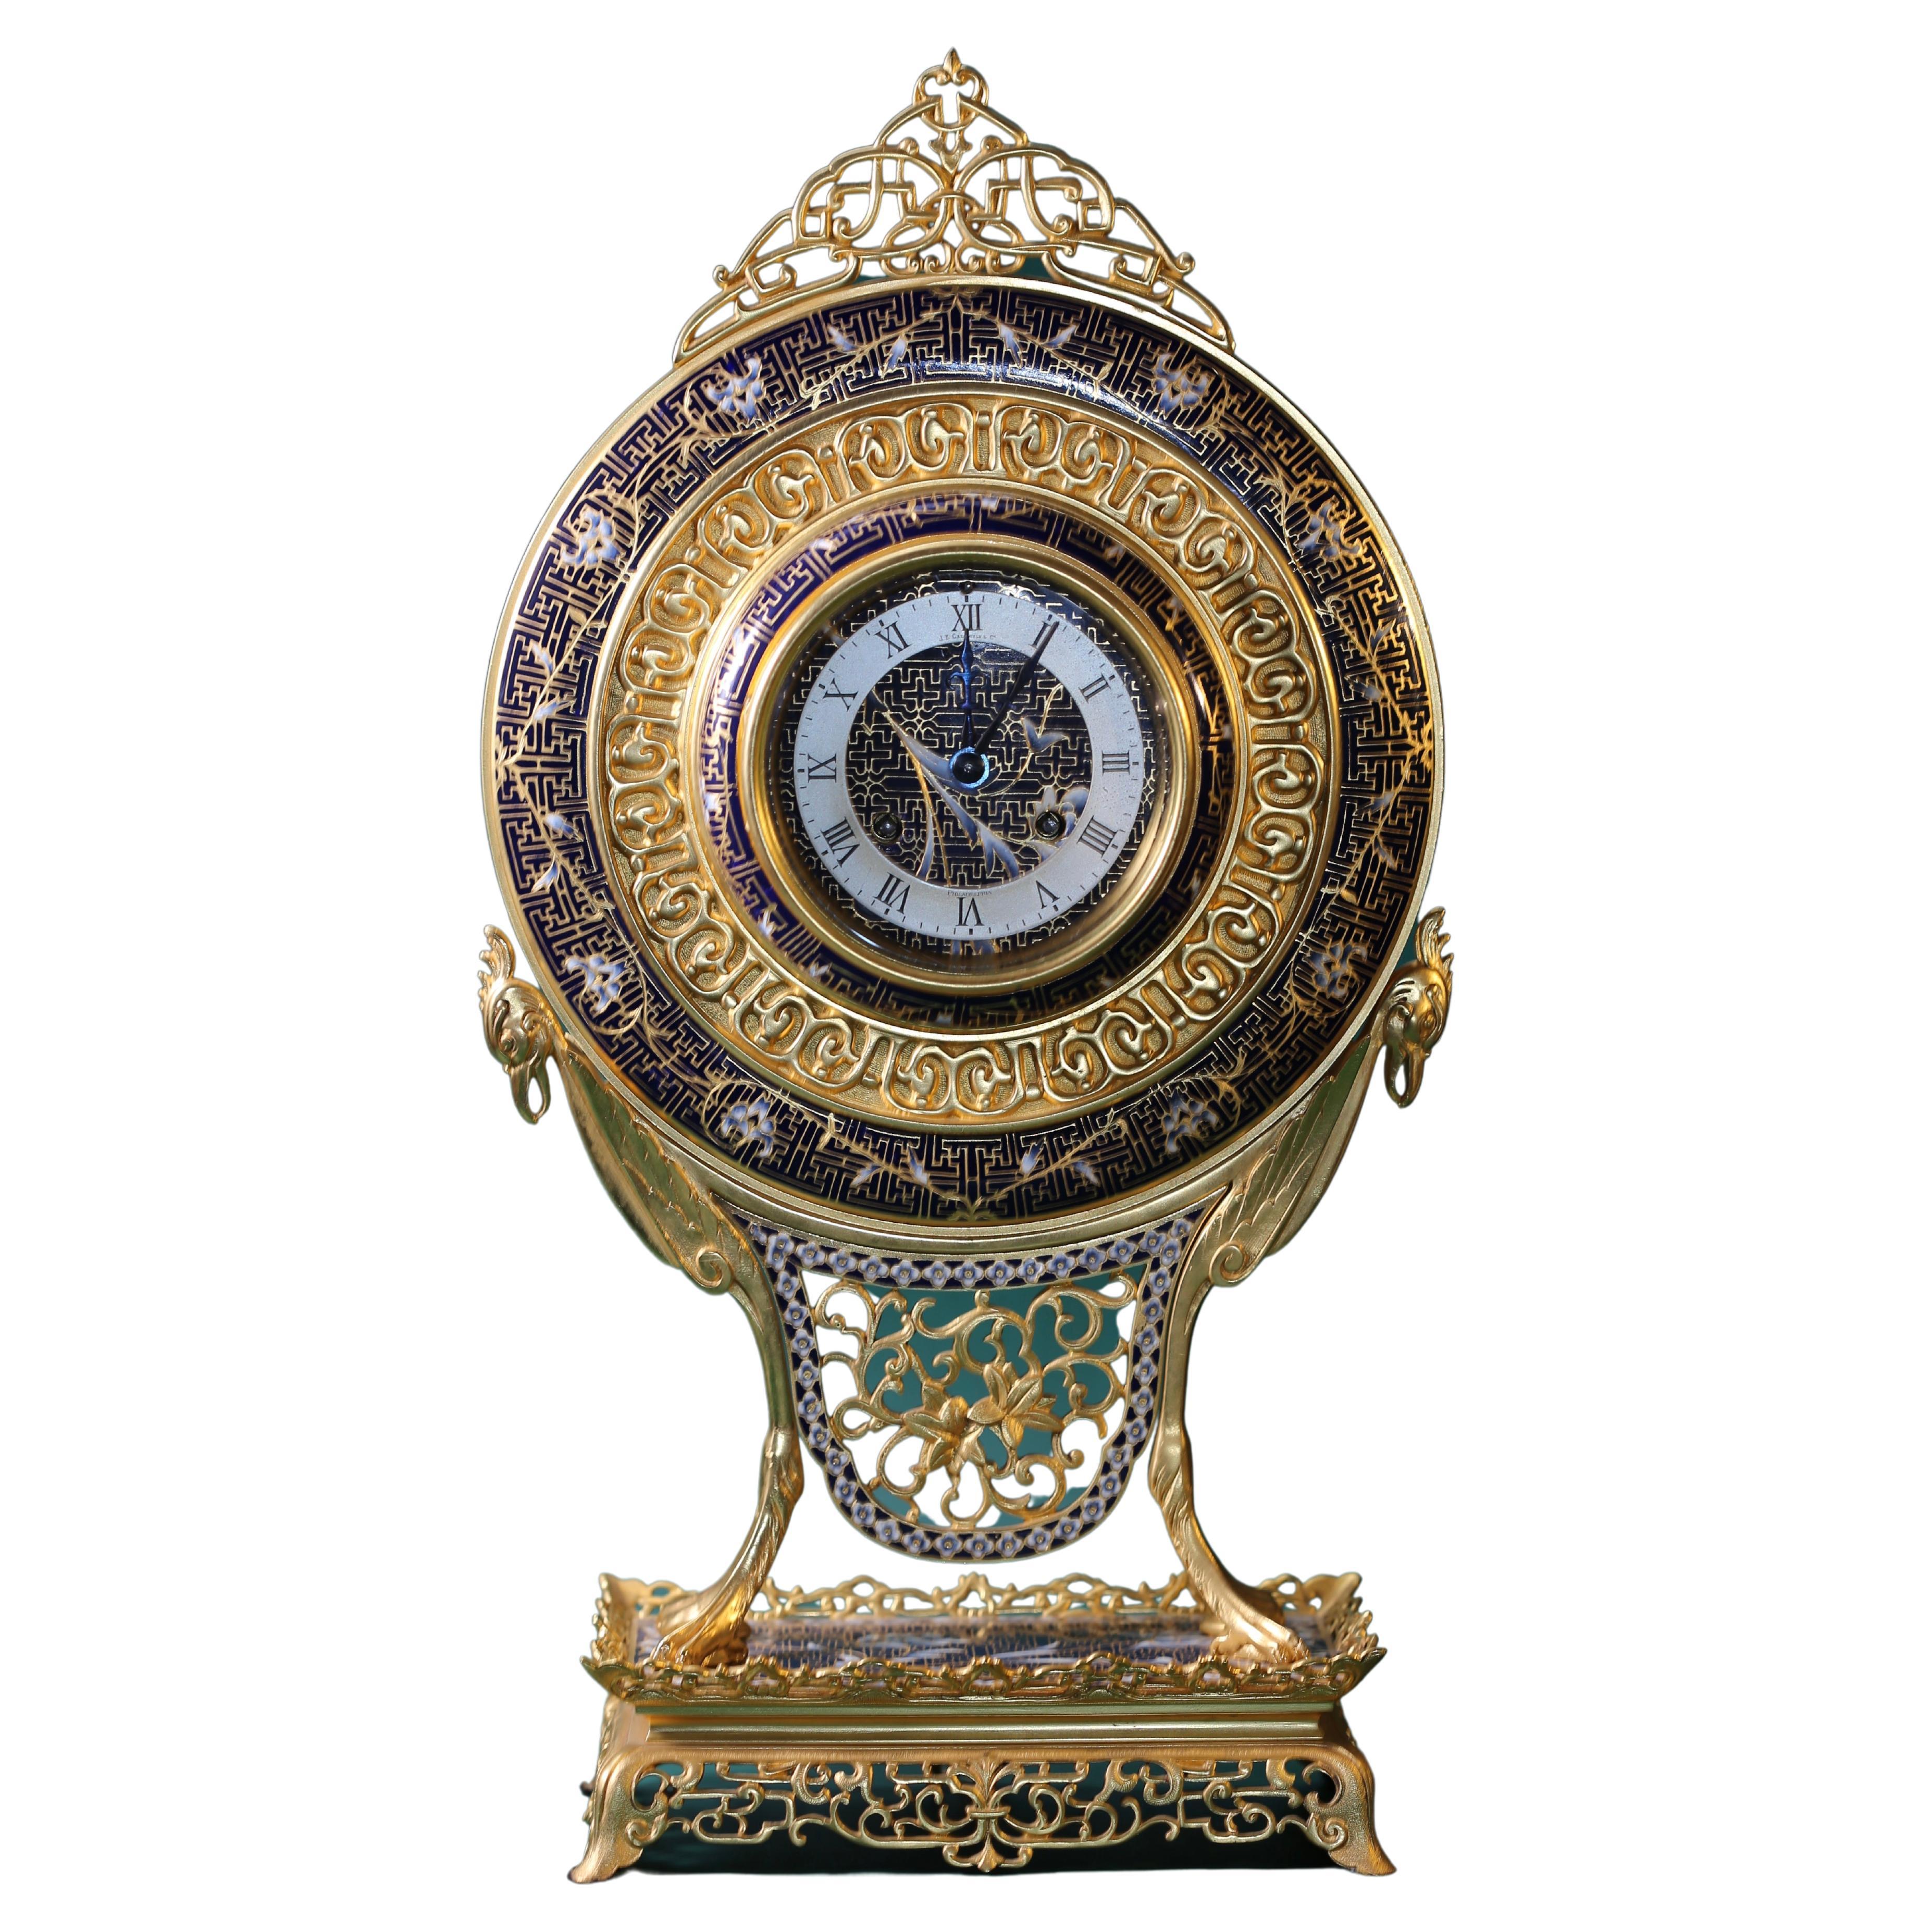 19th Century American Standing Clock by J.E Caldwell & Co